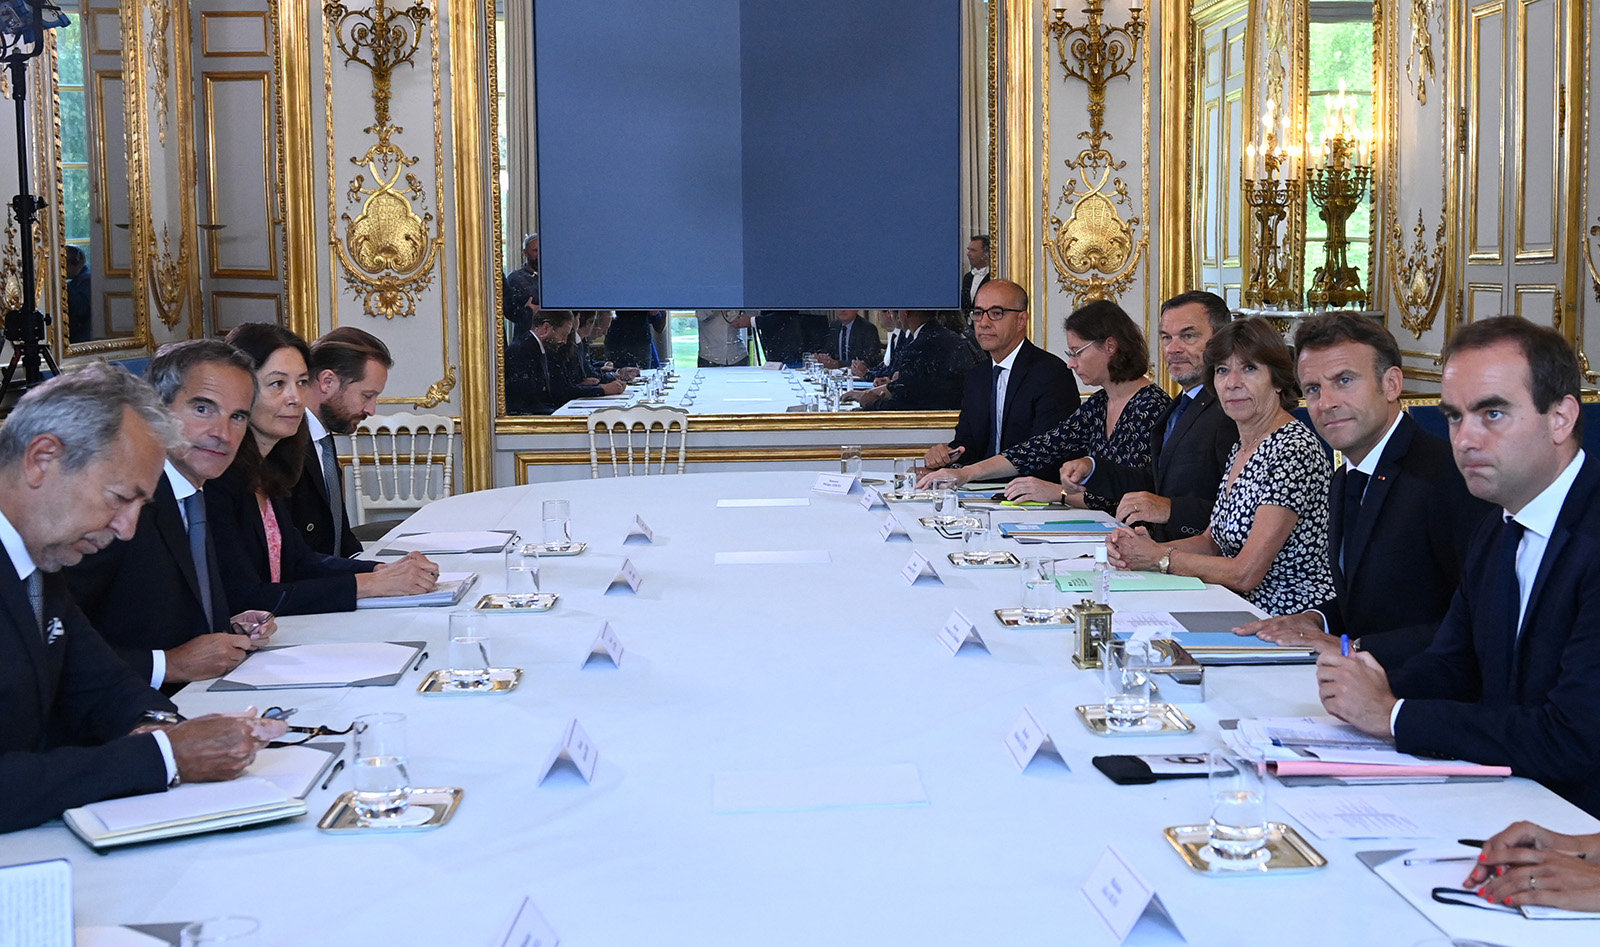 French President Emmanuel Macron, second right, attends a meeting with the Director General of the International Atomic Energy Agency (IAEA) Rafael Grossi, second left, at the Elysee Palace in Paris, France, on August 25.